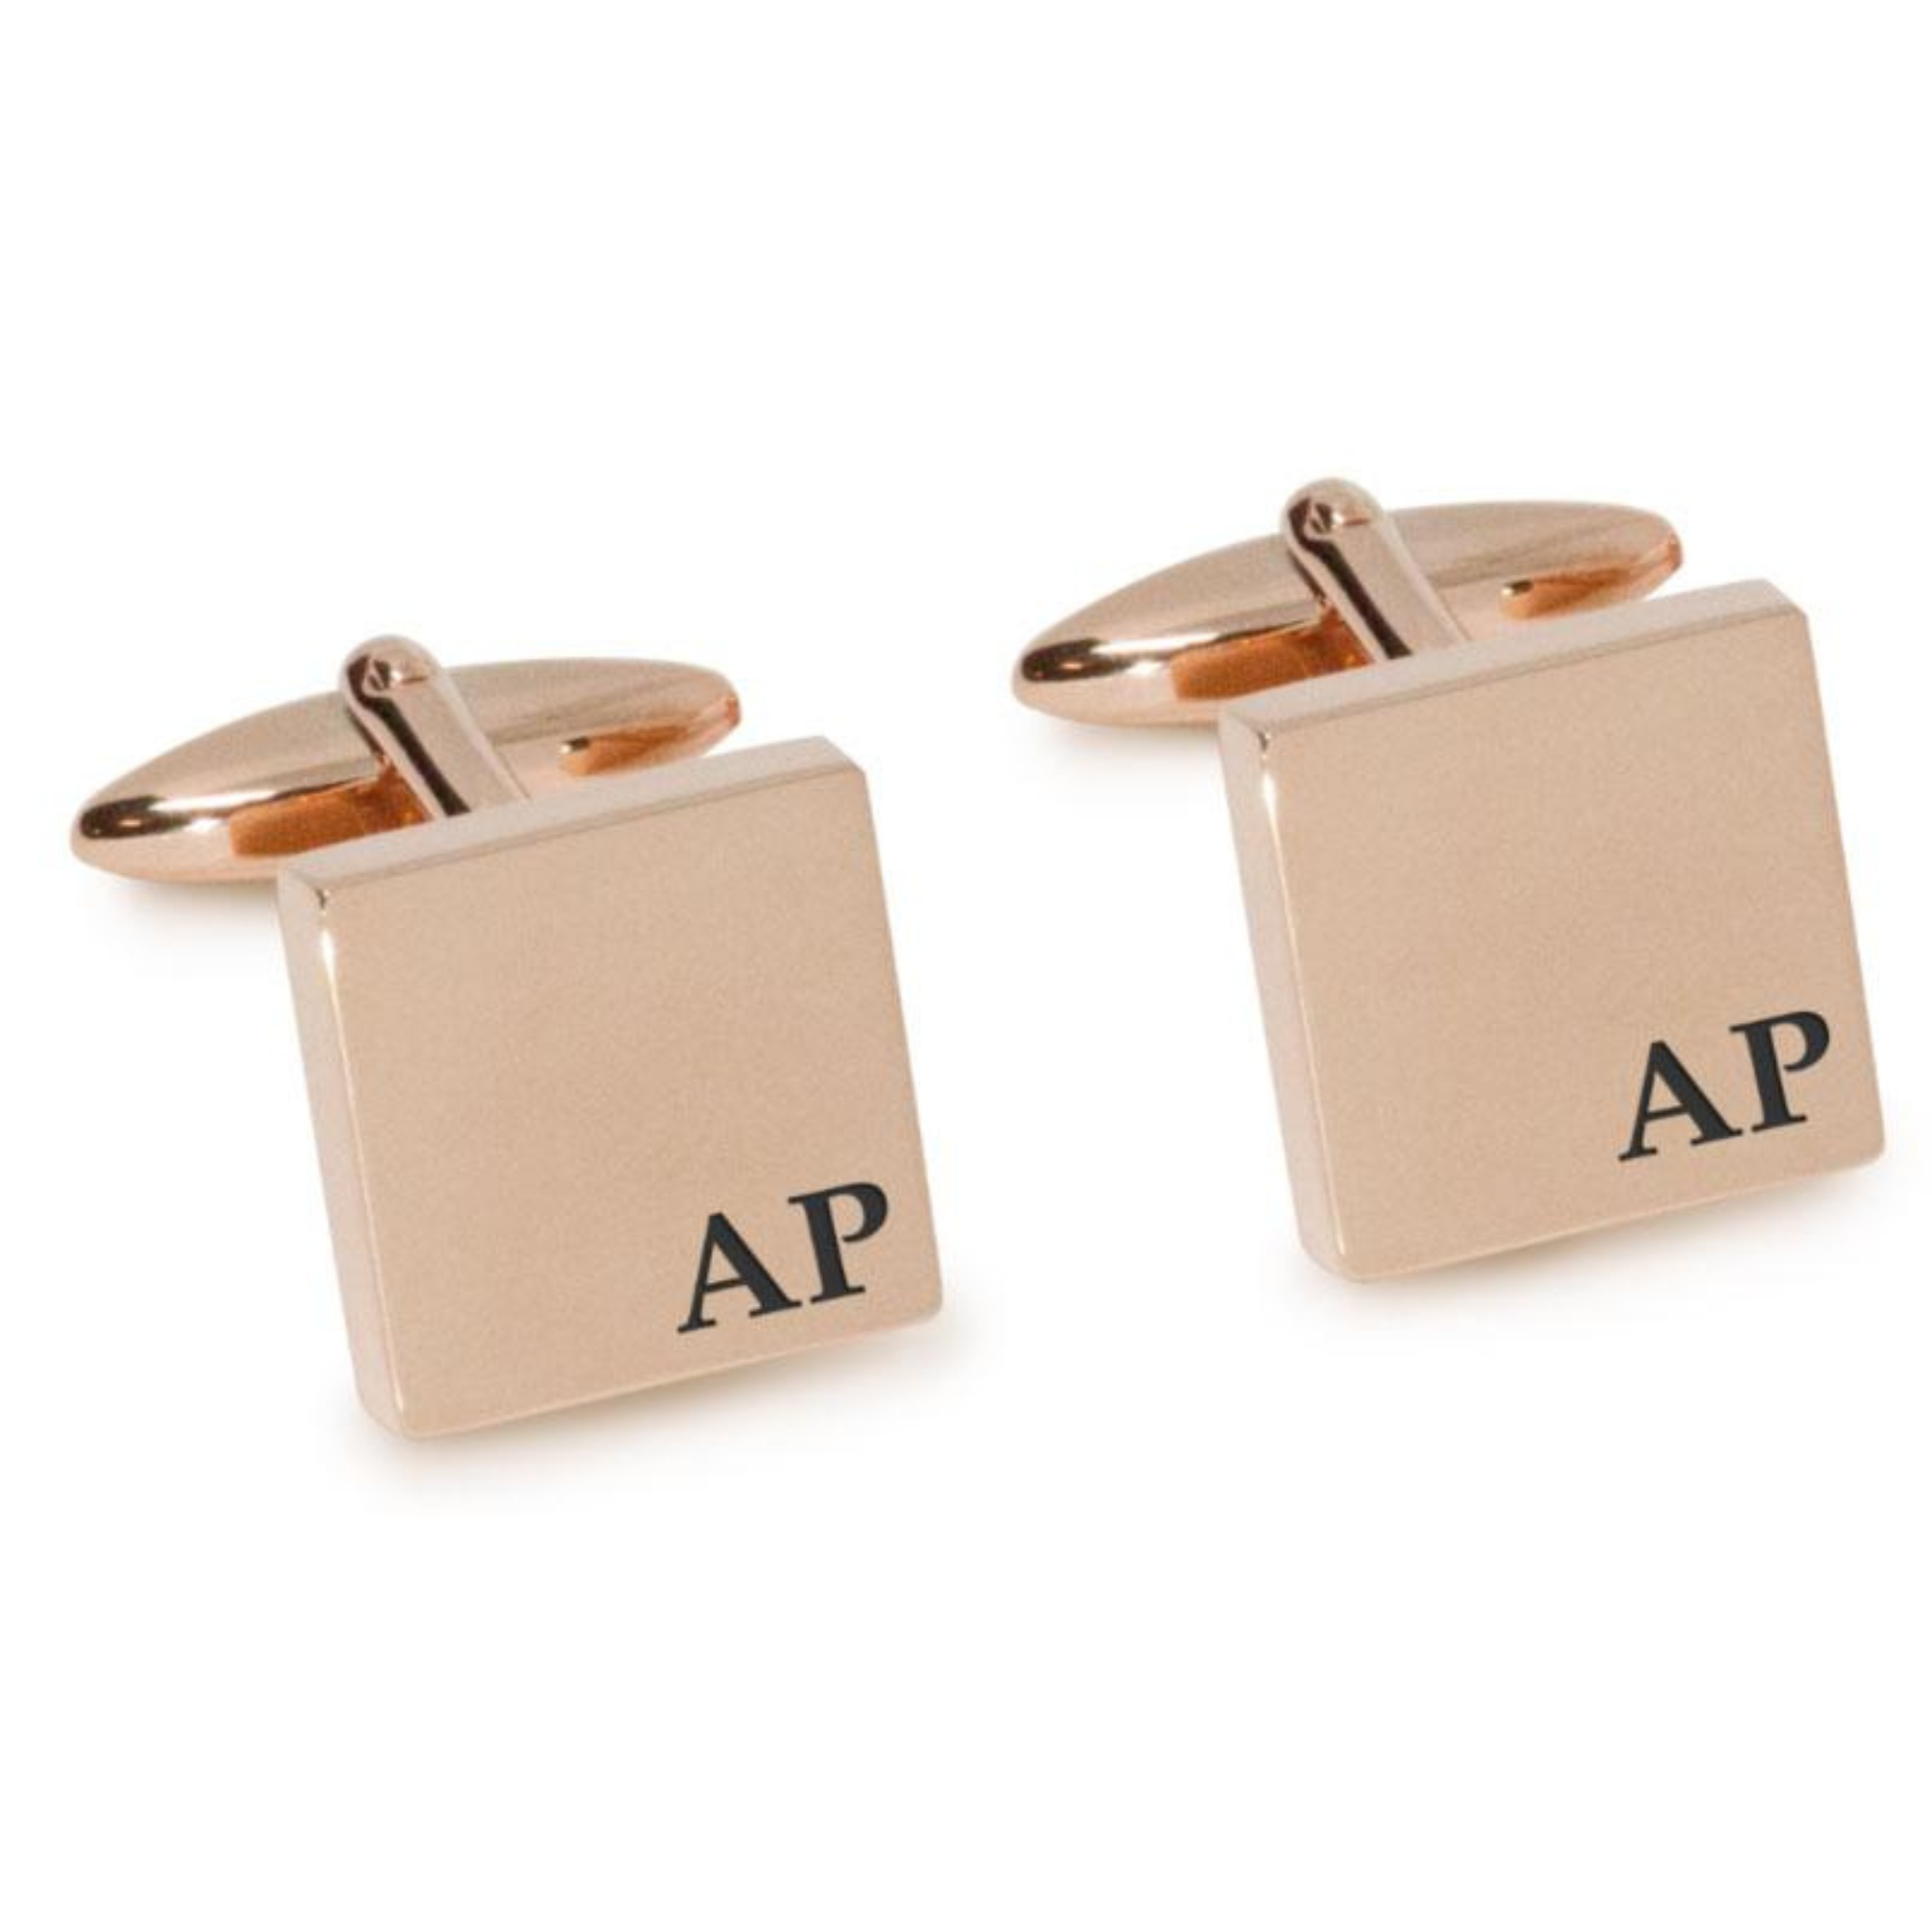 Initials Engraved Cufflinks in Rose Gold